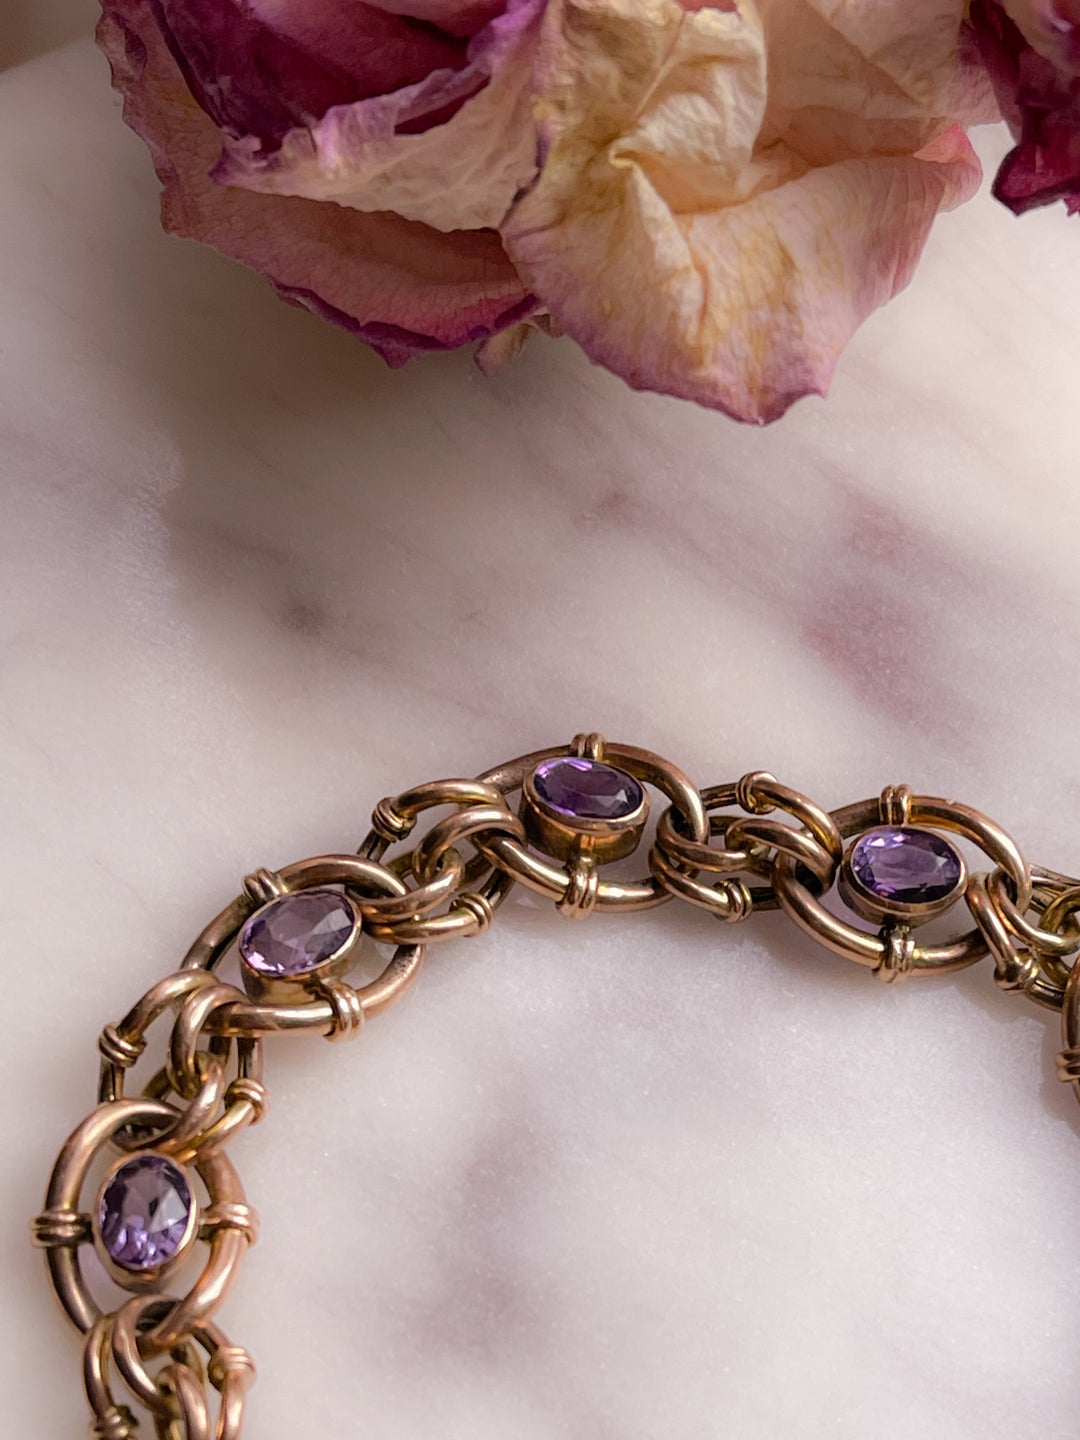 Outrageous Late Victorian 9k Heart Padlock Amethyst Station Bracelet *include 2 ribbons* *include red antique box*